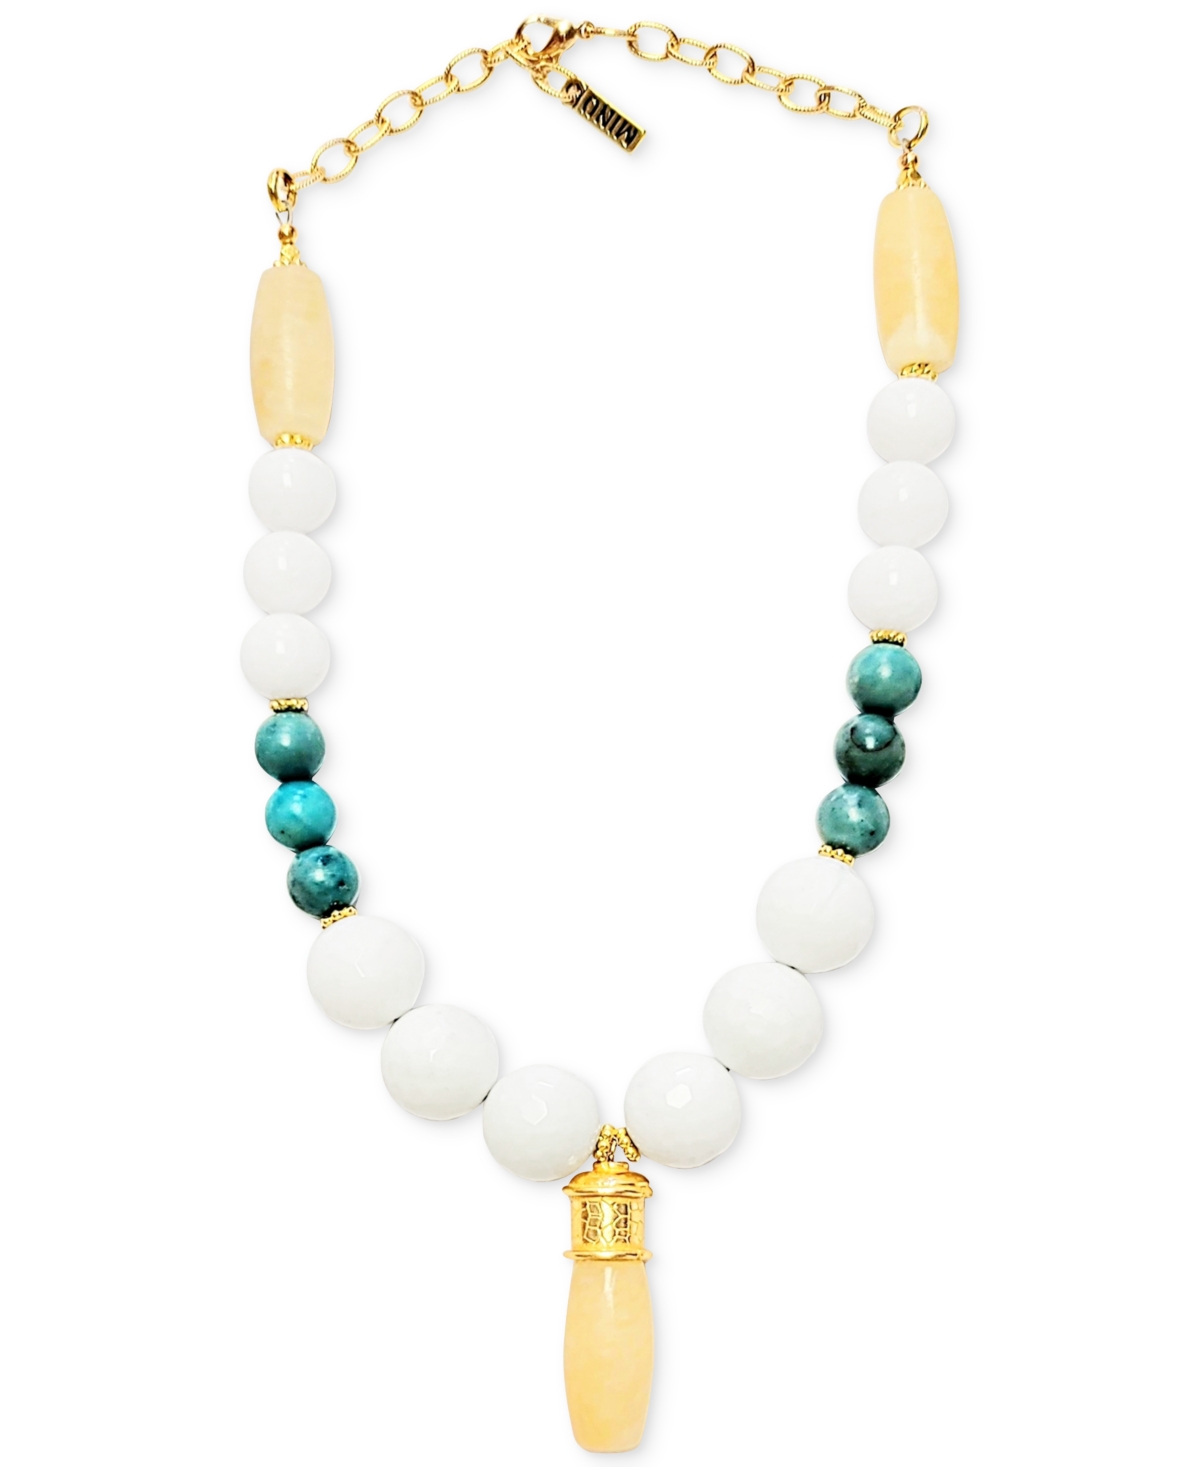 Gold-Tone Jade & Turquoise Pendant Necklace, 16" +2" extender - White Gold Turquoise